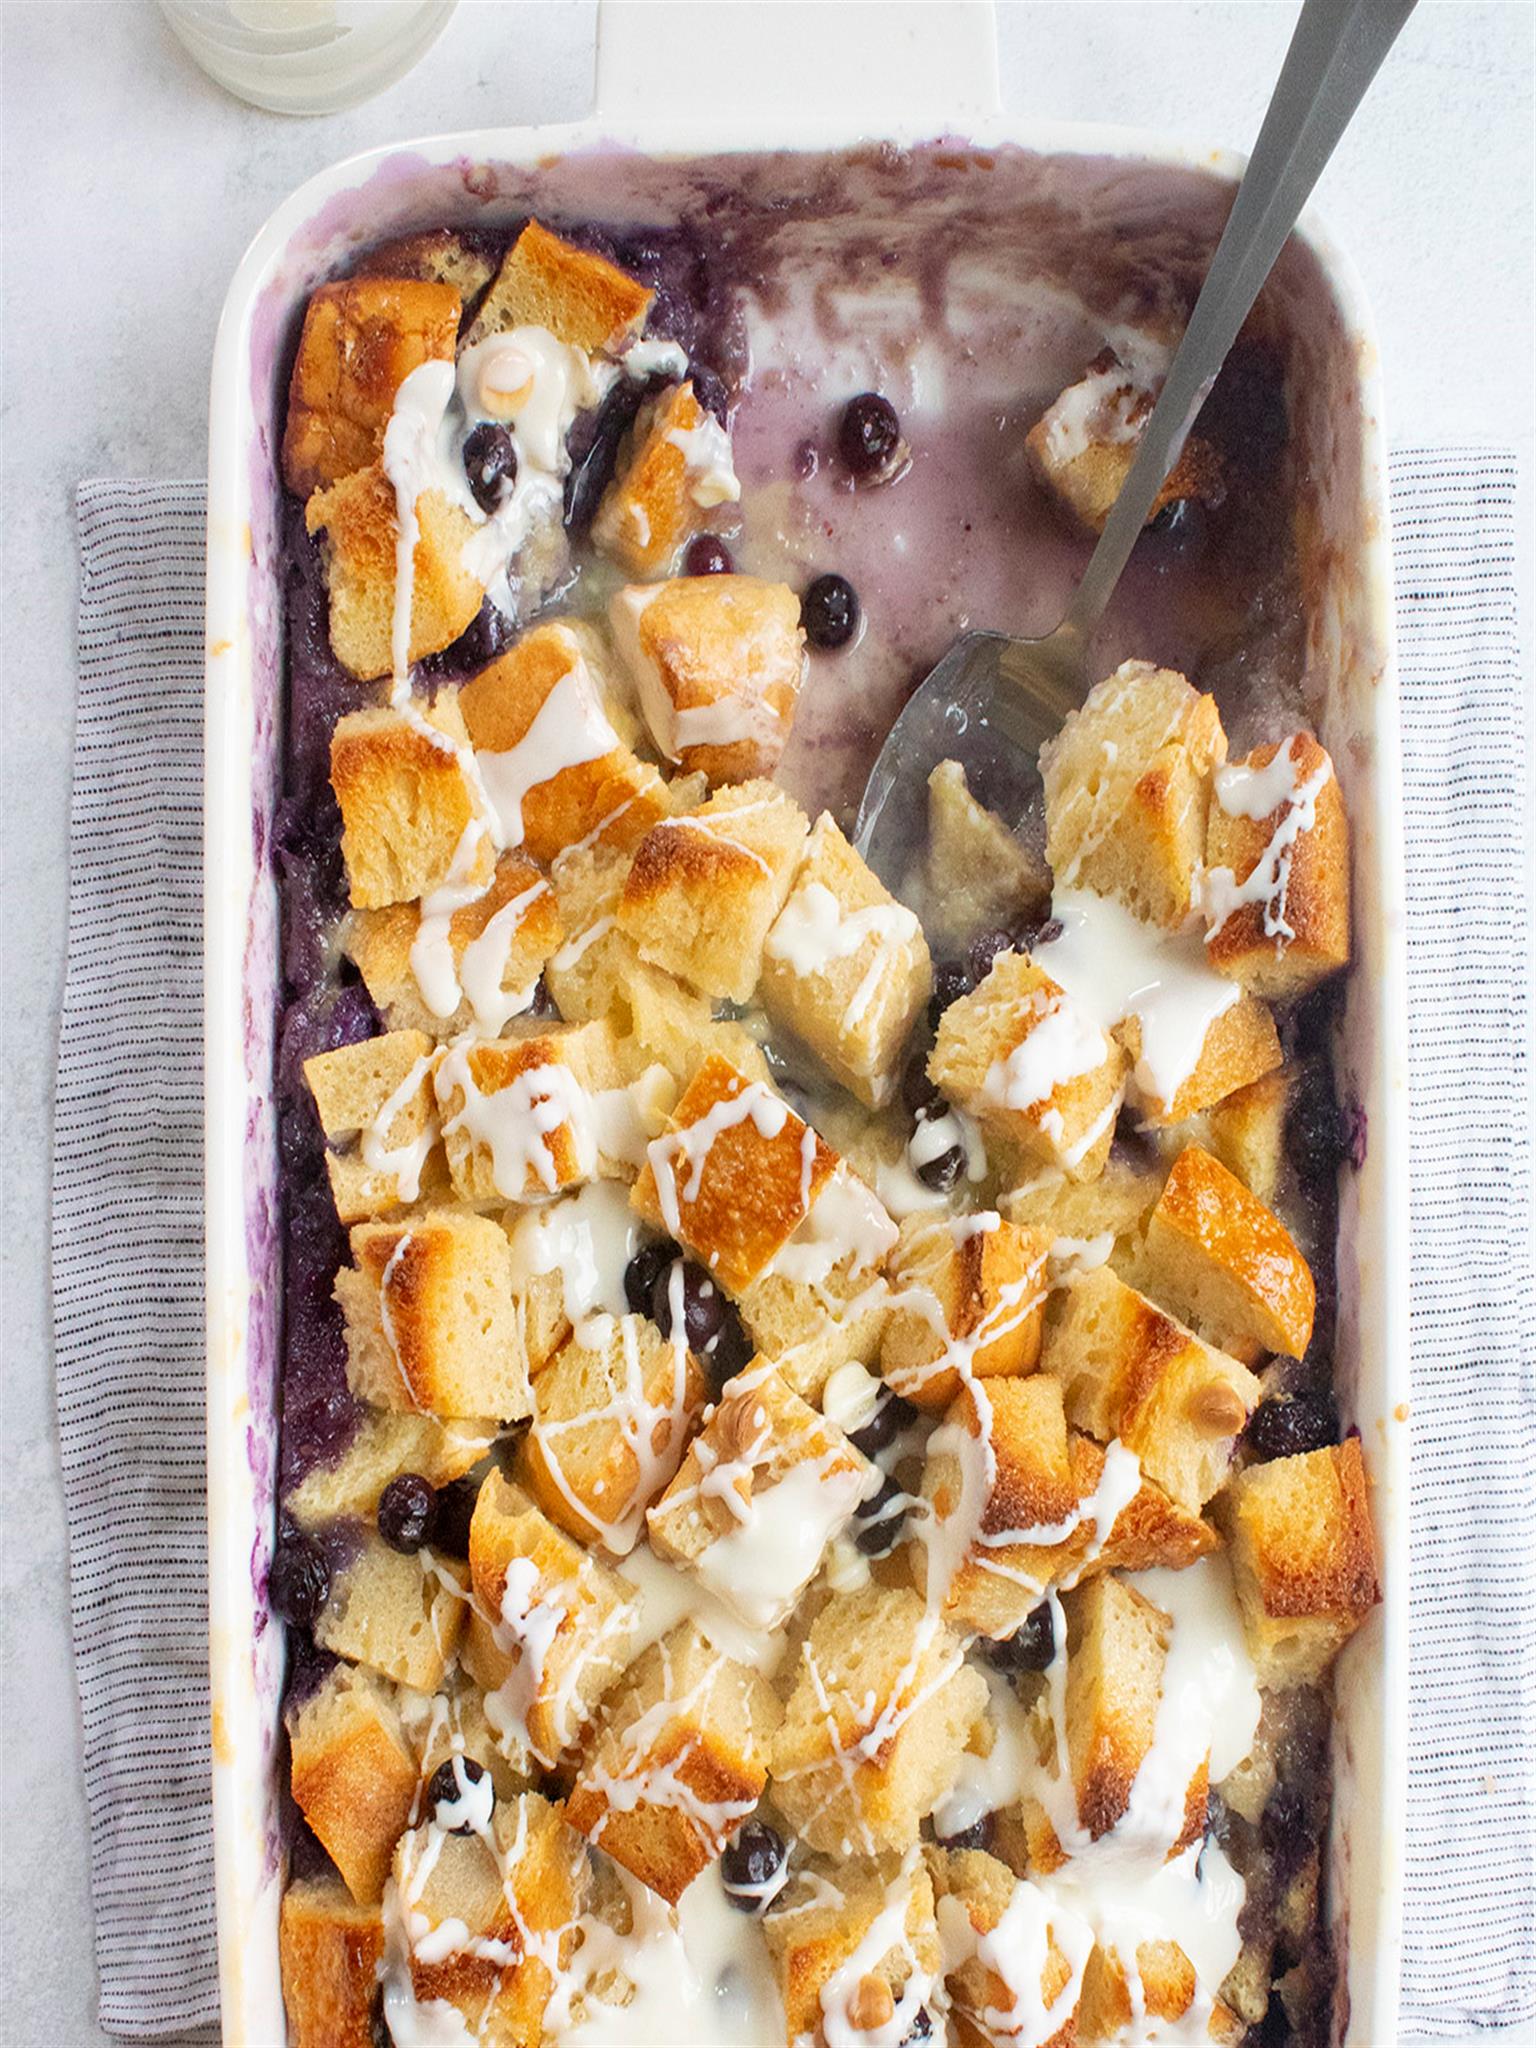 Over The Top Blueberry Bread Pudding Recipe How To Make It